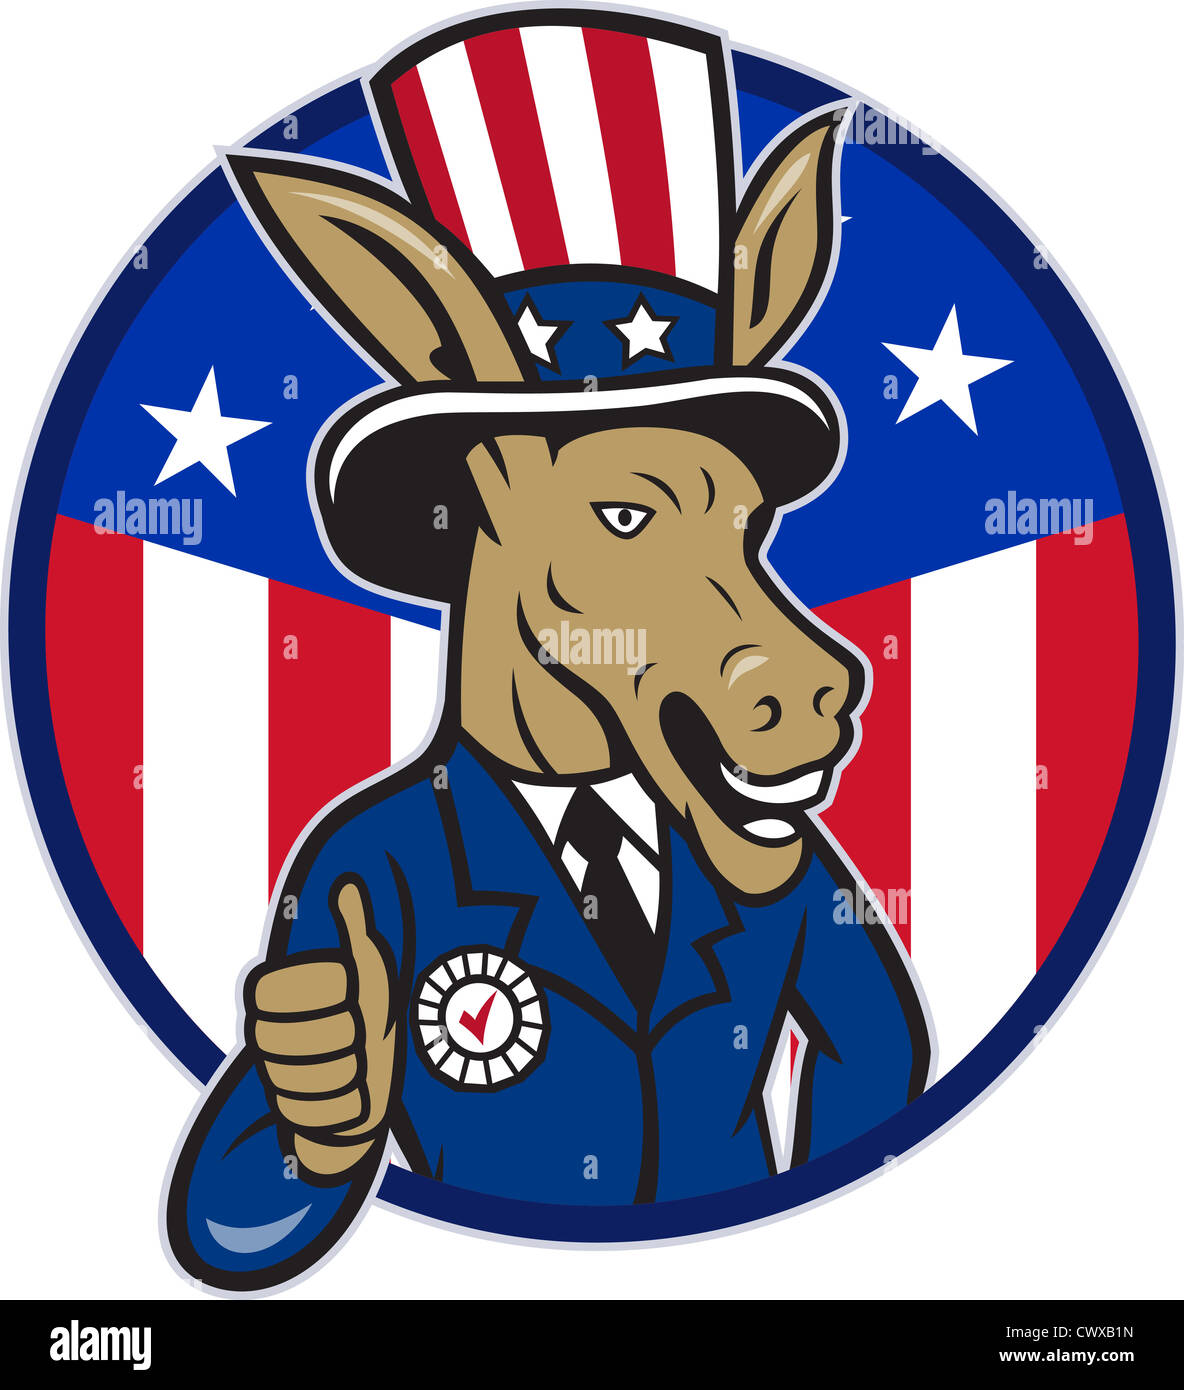 Illustration of a democrat donkey mascot of the democratic grand old party gop wearing hat and suit thumbs up Stock Photo